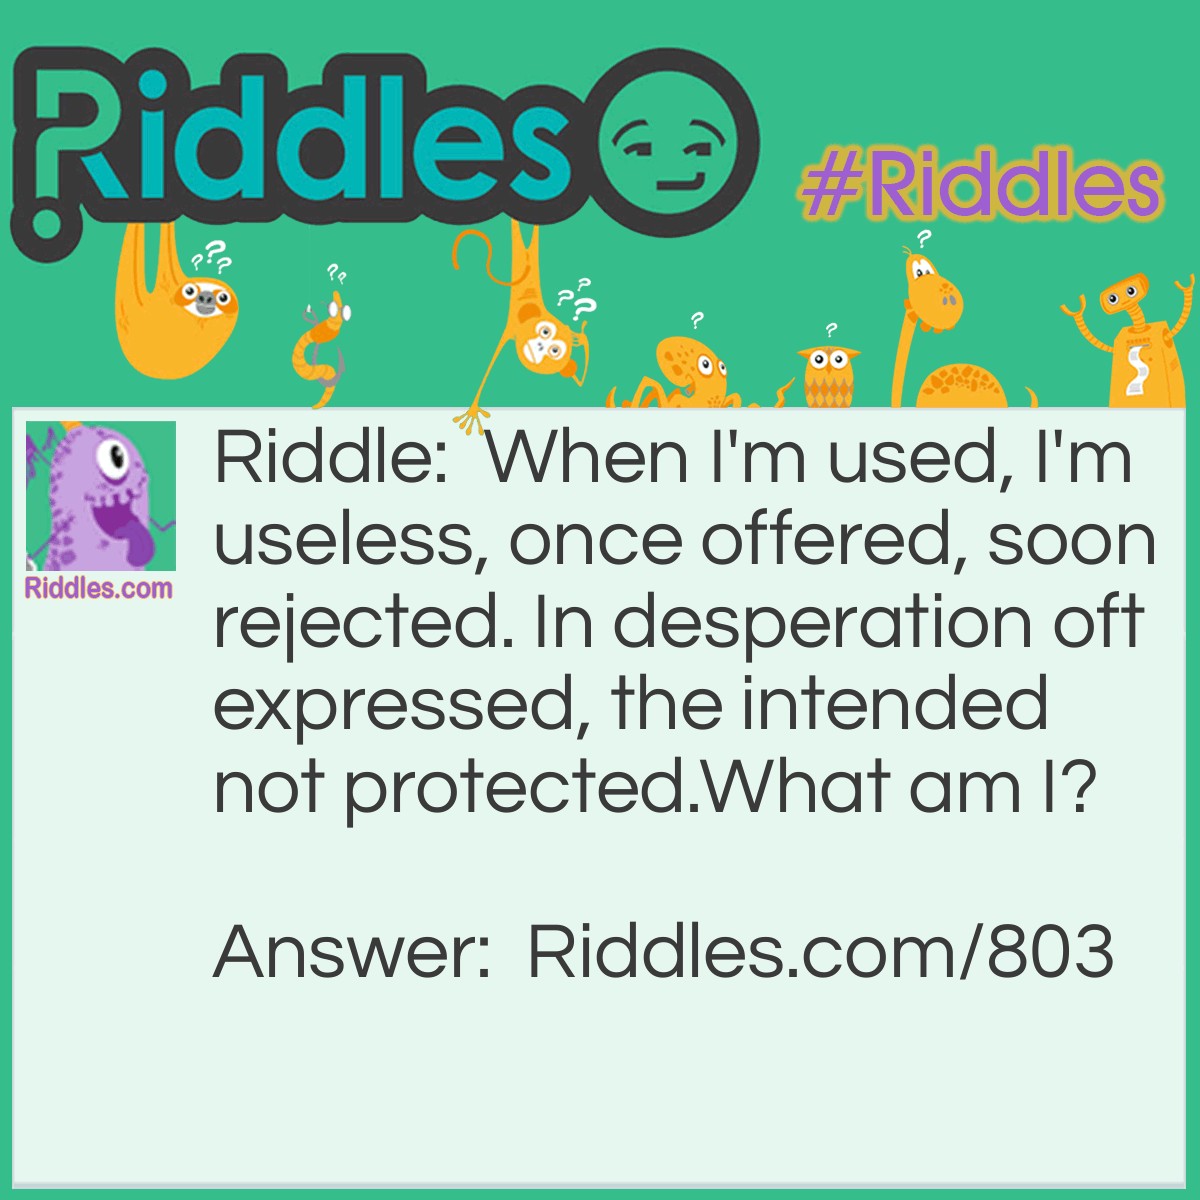 Riddle: When I'm used, I'm useless, once offered, soon rejected. In desperation oft expressed, the intended not protected.
What am I? Answer: A poor alibi or excuse.